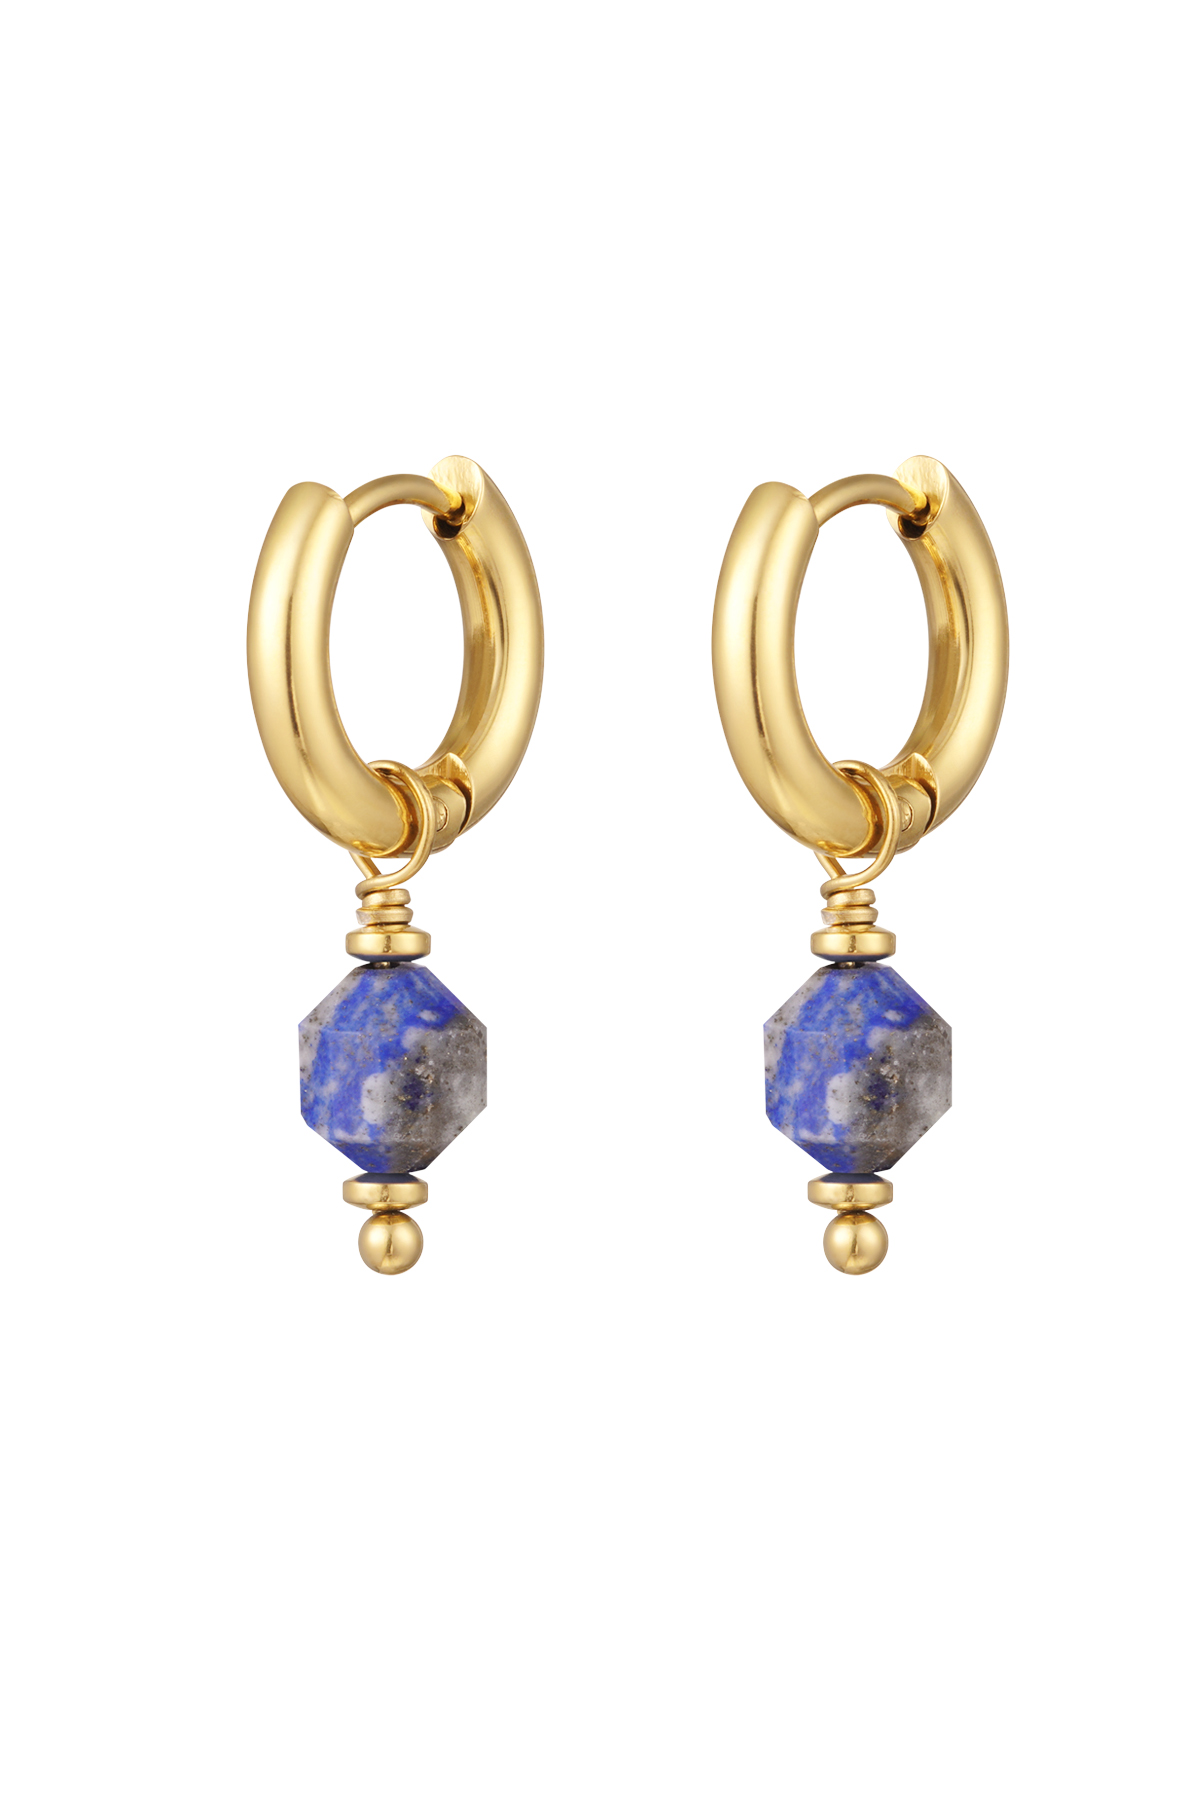 Gold / Earrings with September stone - gold/blue Picture11